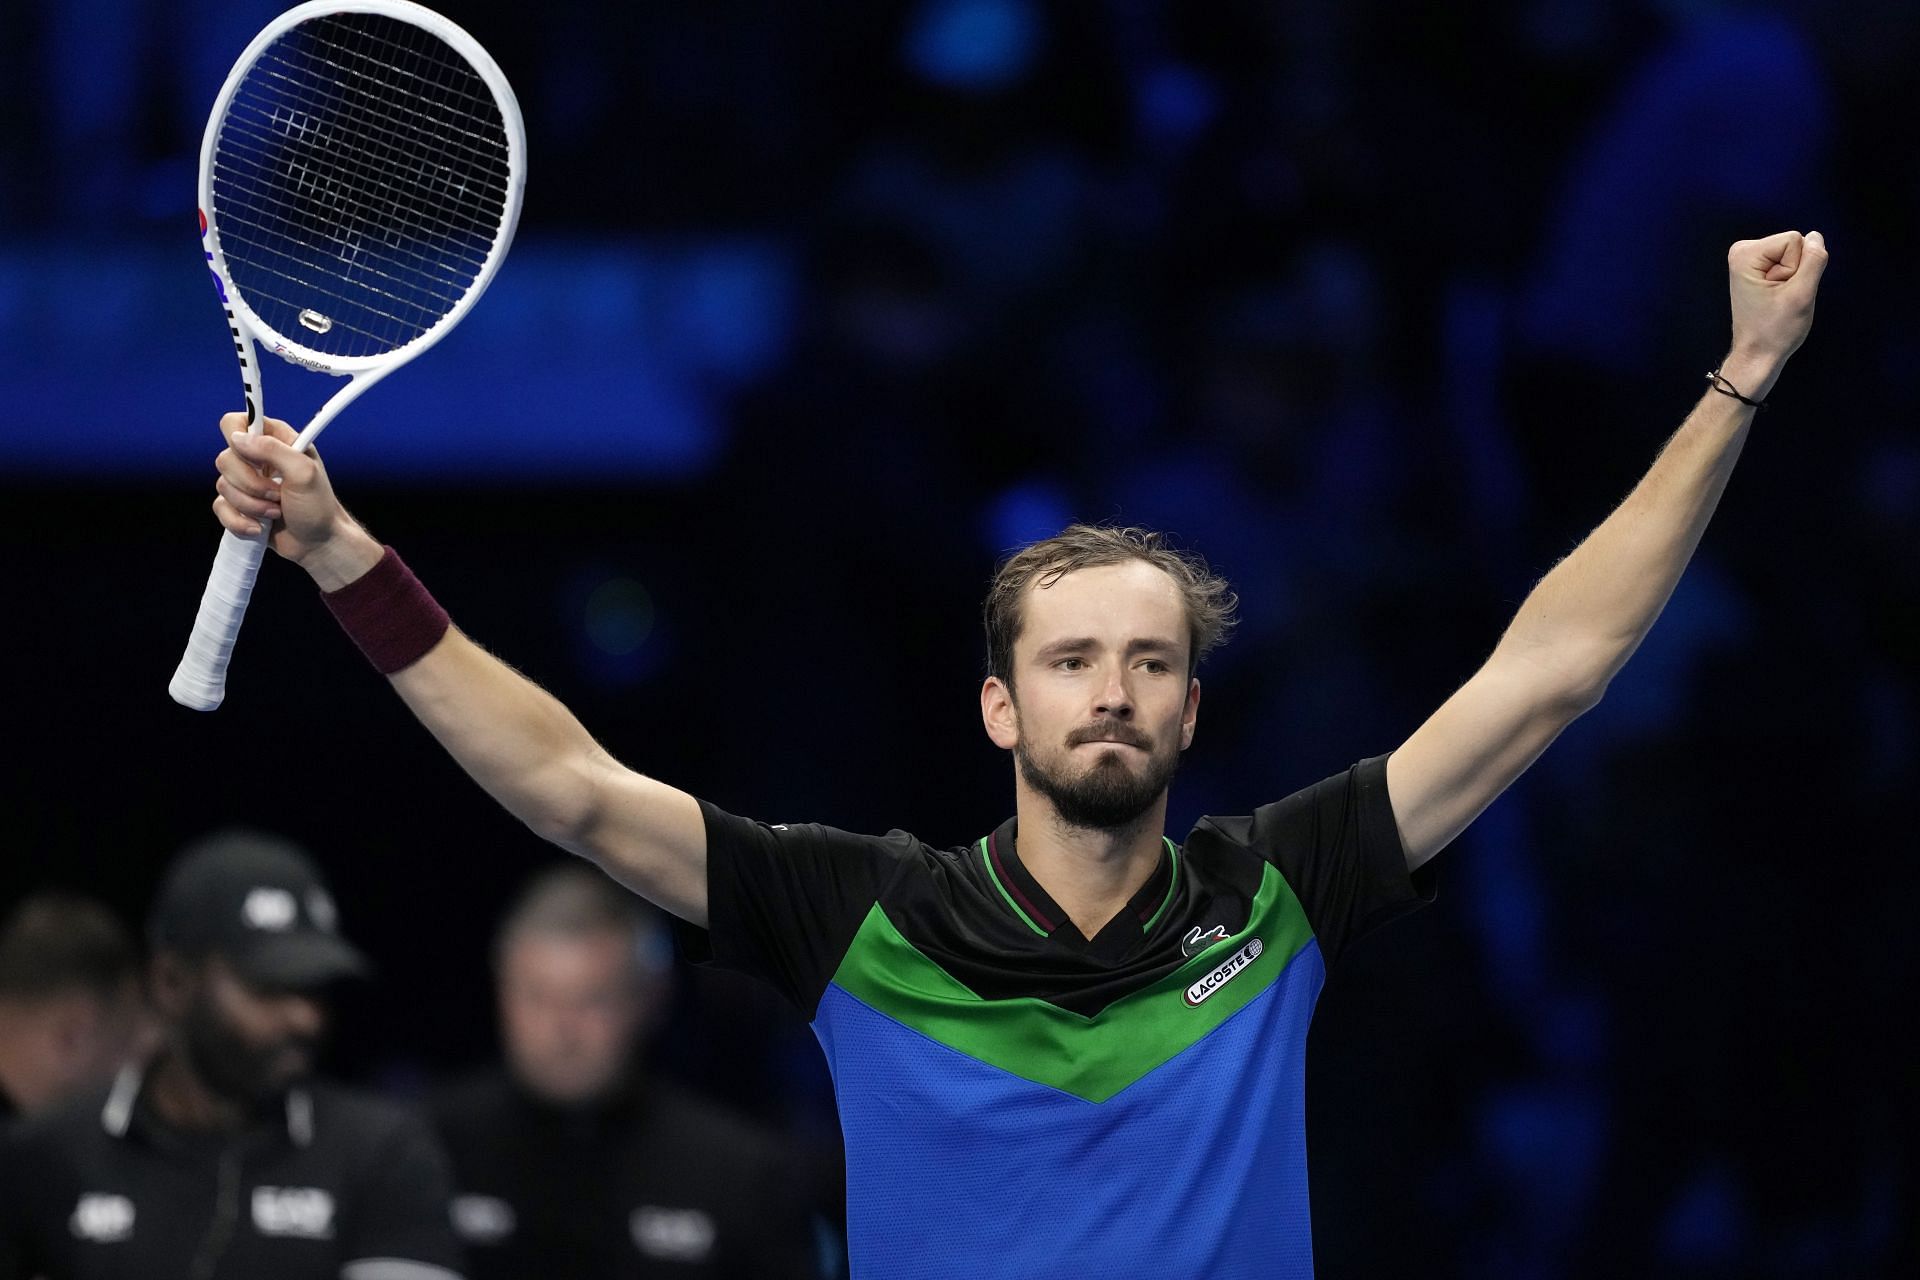 Daniil Medvedev will also be in action on Day 6 of the ATP Finals.